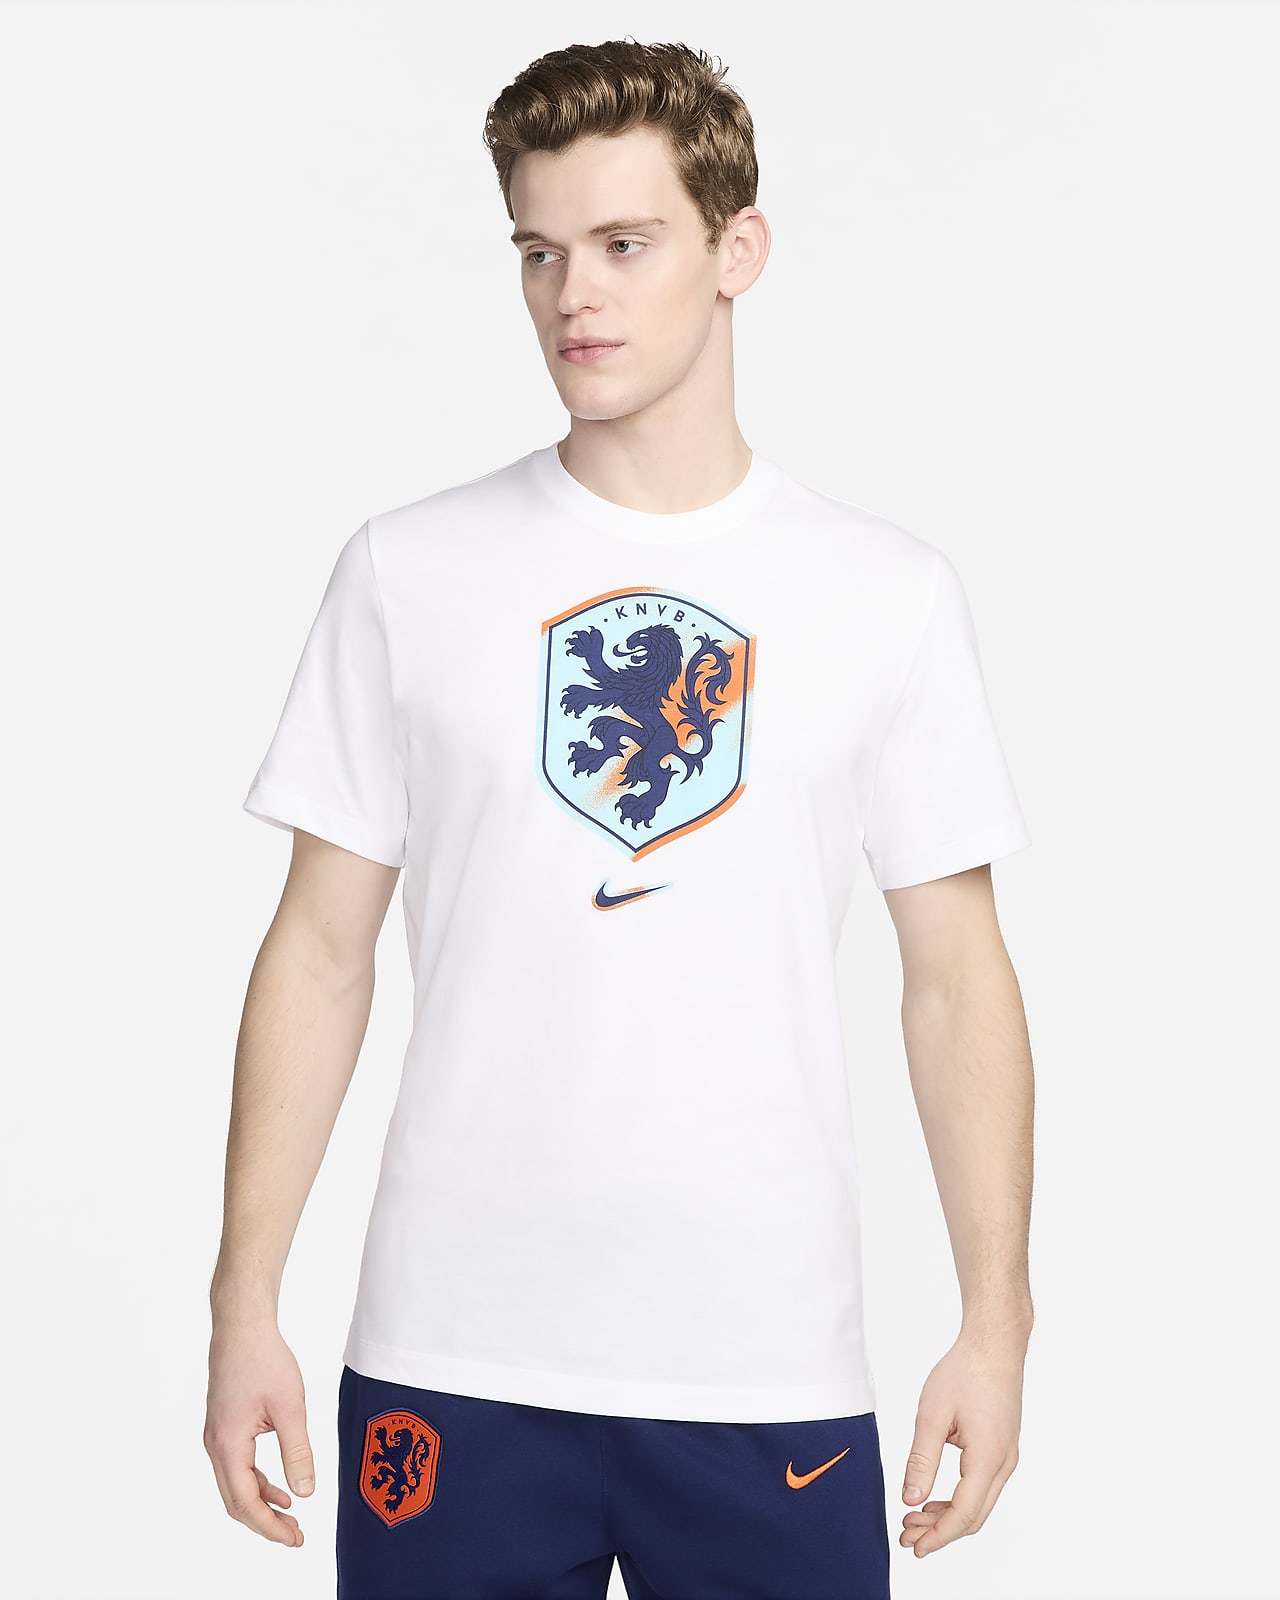 T-shirt Nike Football Pays-Bas pour homme